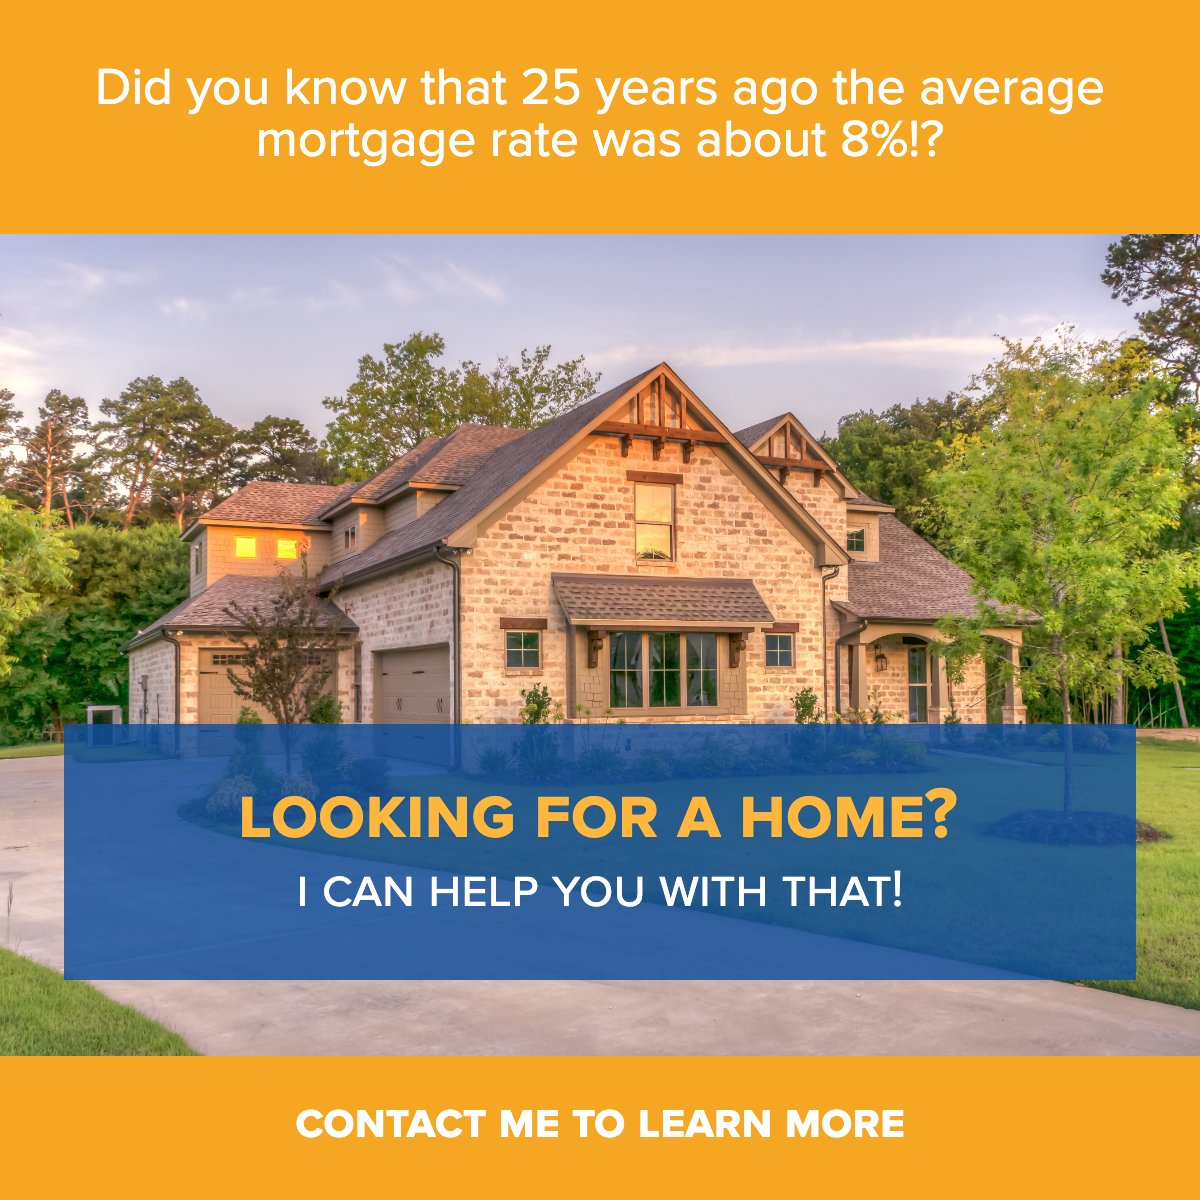 Did you know that 25 years ago the average mortgage rate was about 8%? 🤔

#buyingahome #buyahome #homebuyers #homebuying
 #AmericasMortgageSolutions #christianpenner #onestopbrokershop #mortgagebrokerwestpalmbeach #epicrealeststedeals #TheChristianPennerMortgageTeam